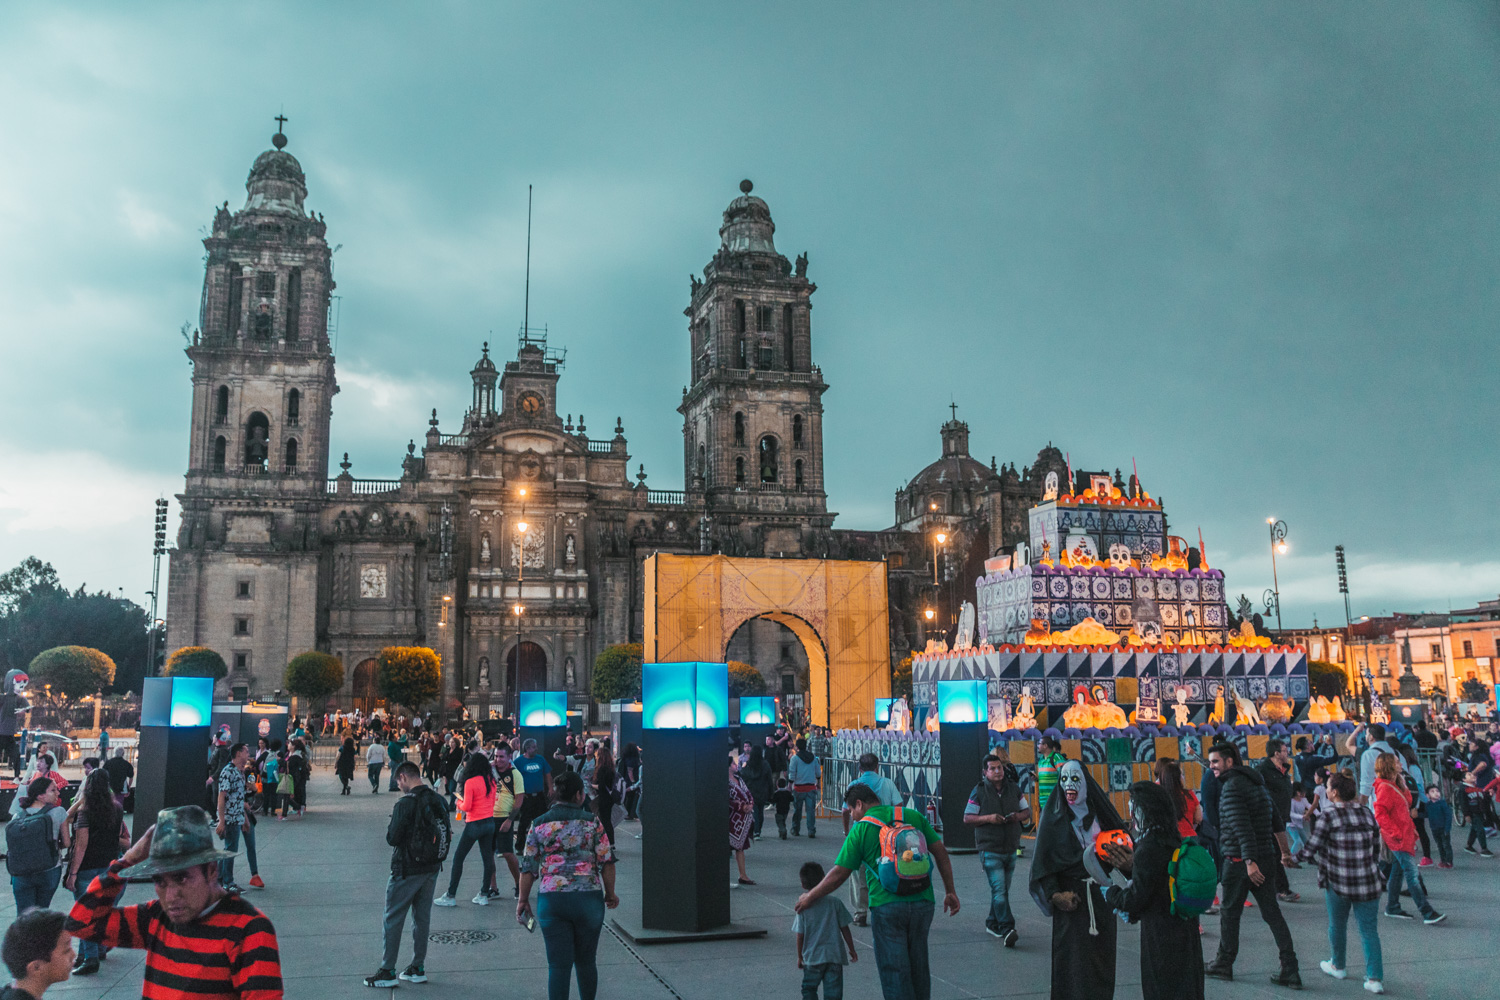 Zocalo during Day of the Dead // Mexico City Day of the Dead Parade // What to Do In Mexico City for Day of the Dead // www.readysetjetset.net #readysetjetset #mexicocity #dayofthedead #traveltips #blogtips